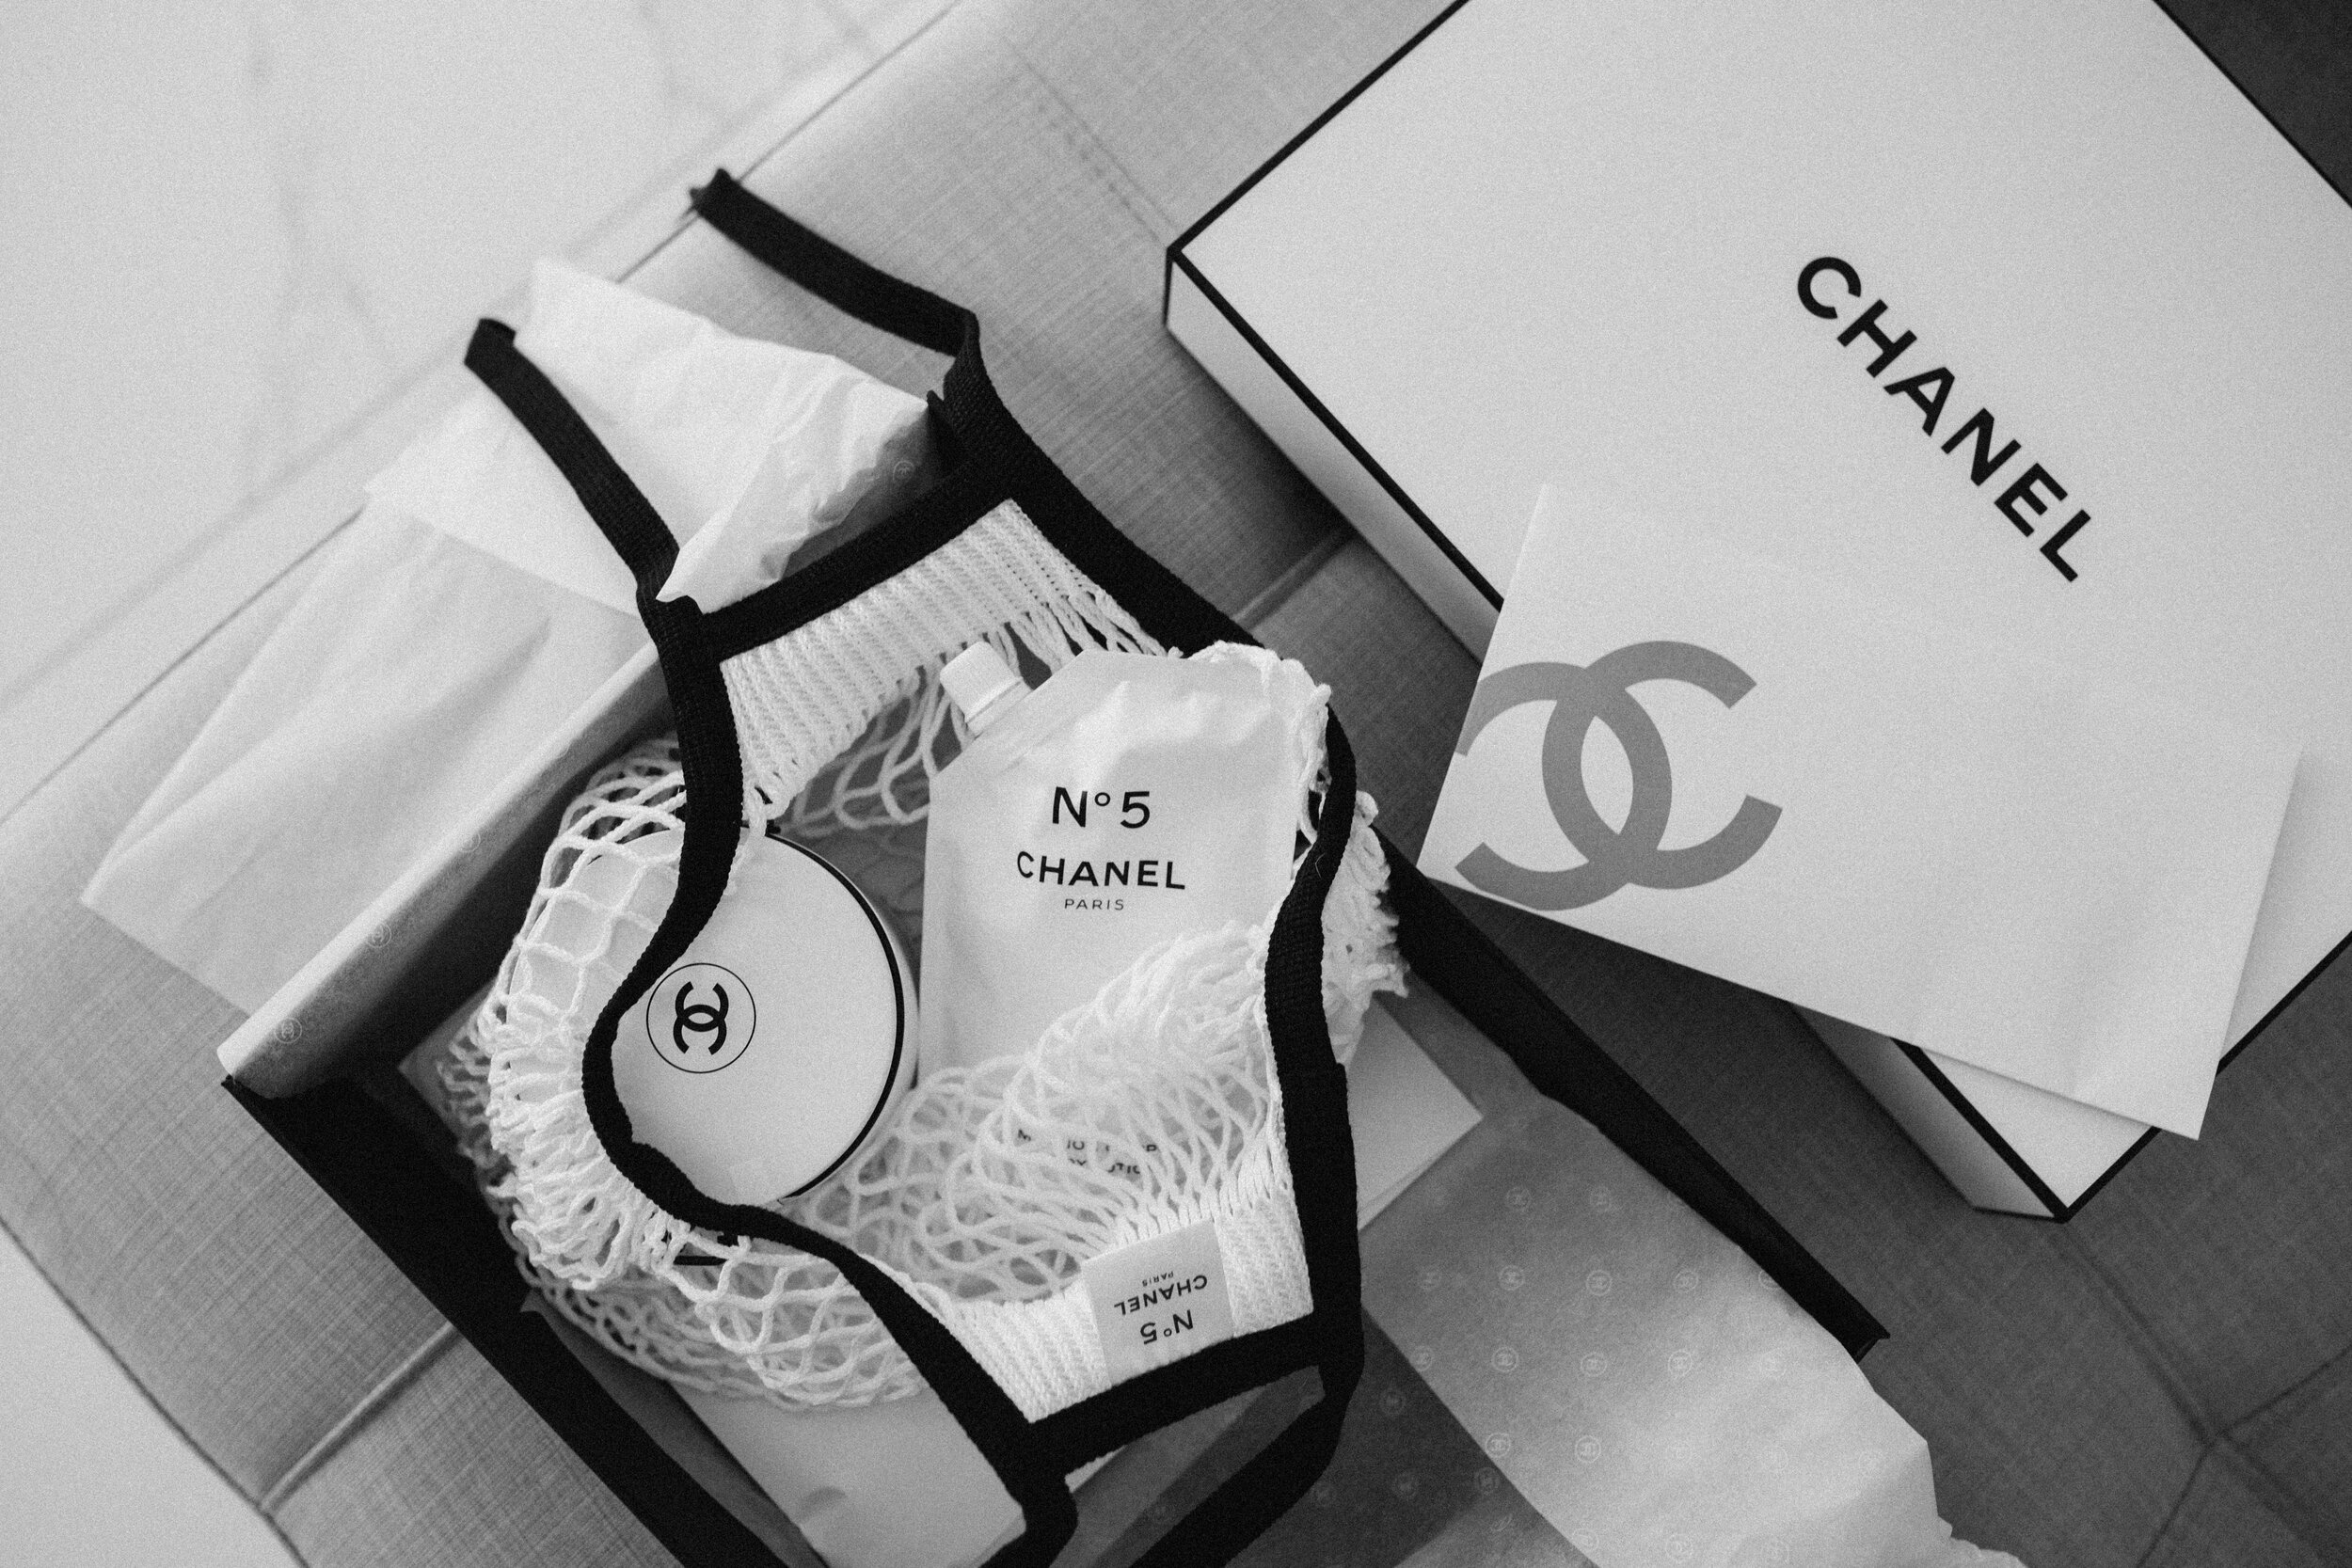 A collector's book to celebrate 100 years of Chanel N°5 - Luxus Plus